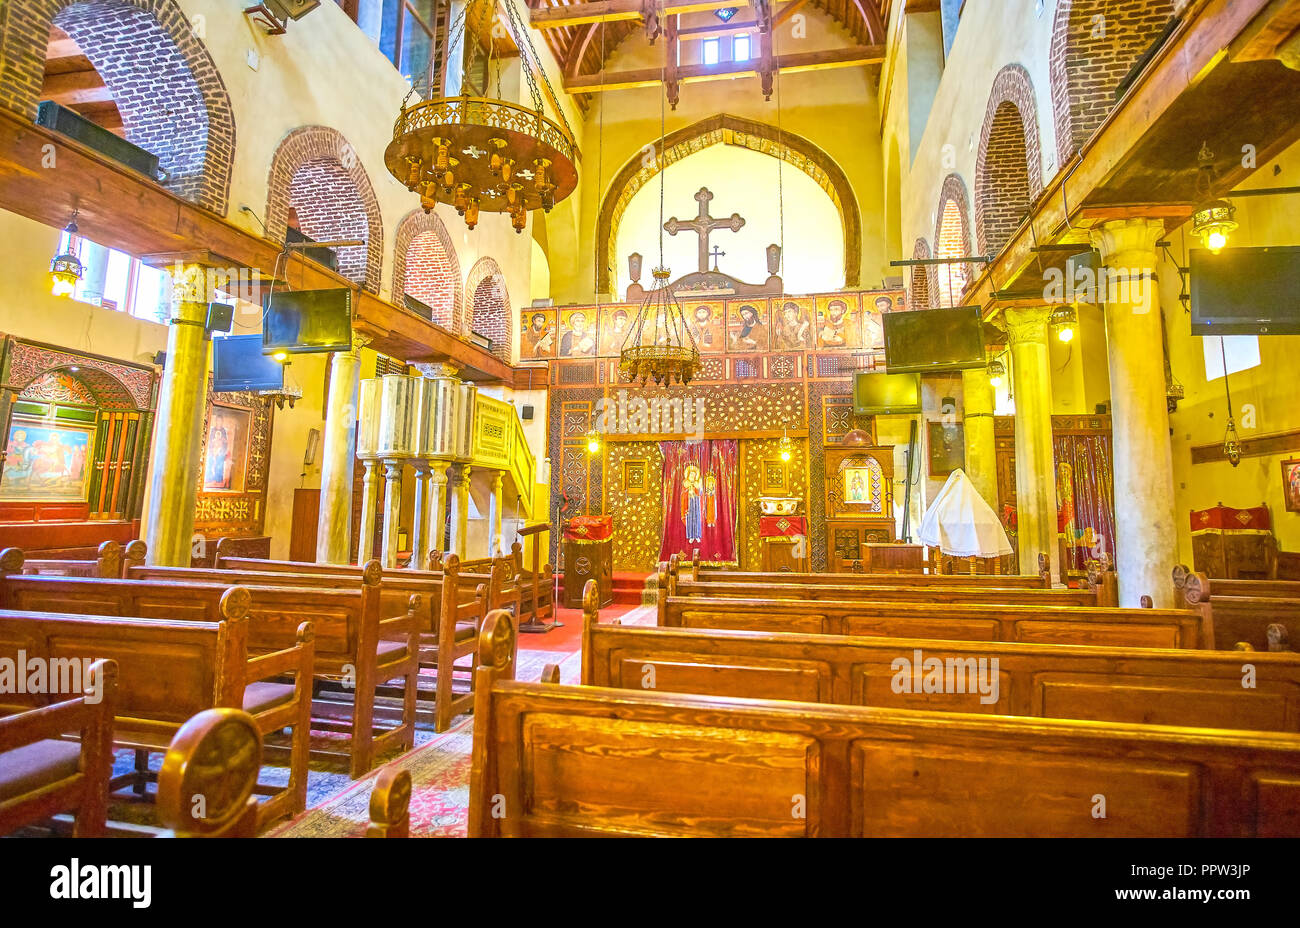 CAIRO, EGYPT - DECEMBER 23, 2017: The beautiful interior of the oldest Coptic St Sergius and Bacchus (Abu Serga) Church decorated with carved wooden i Stock Photo